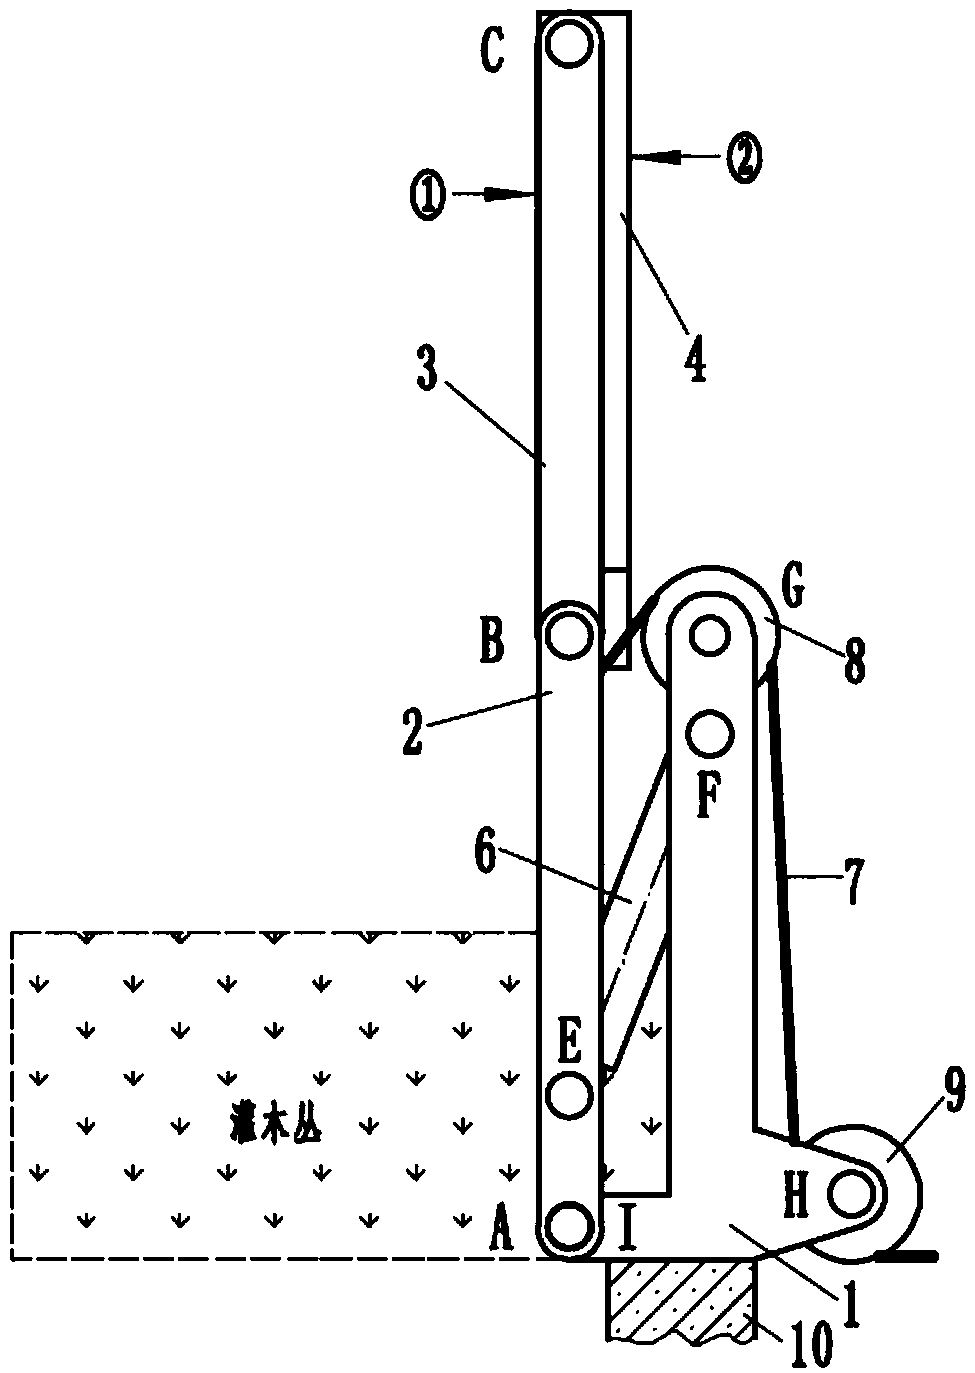 Foldable multifunctional stopping device